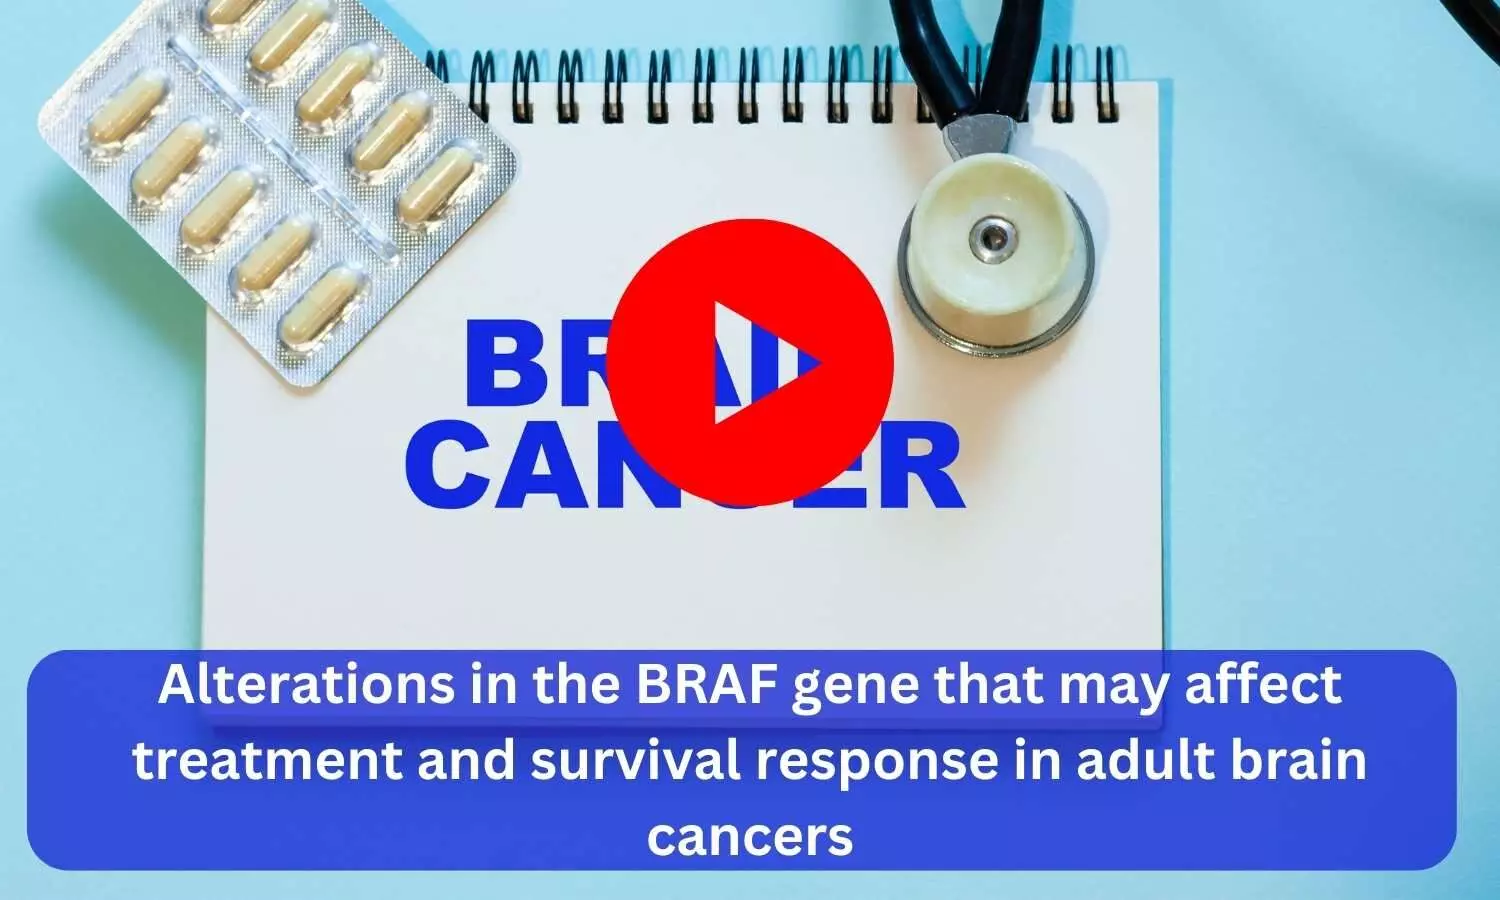 Specific alterations in the BRAF gene found that may affect treatment and survival response in adult brain cancers